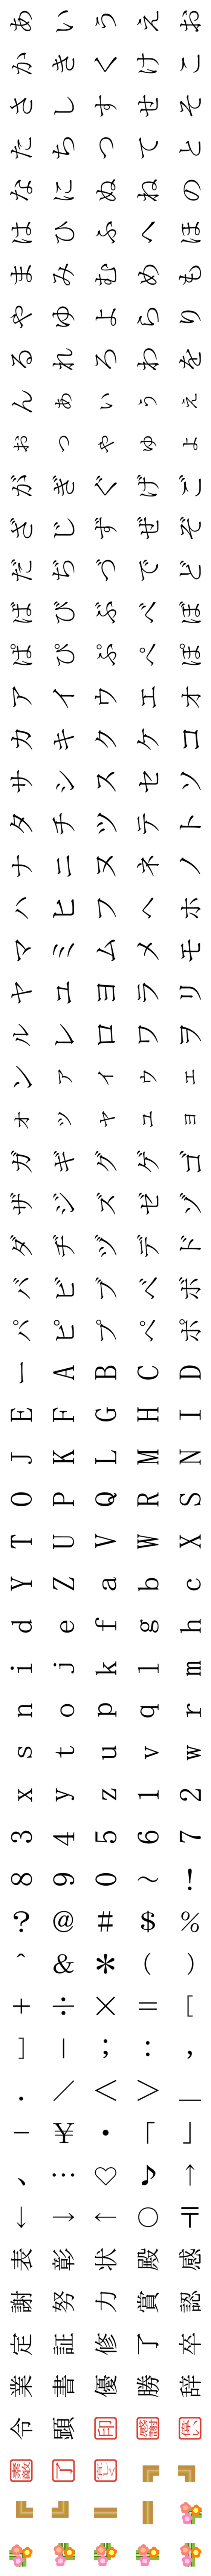 [LINE絵文字]表彰状絵文字の画像一覧